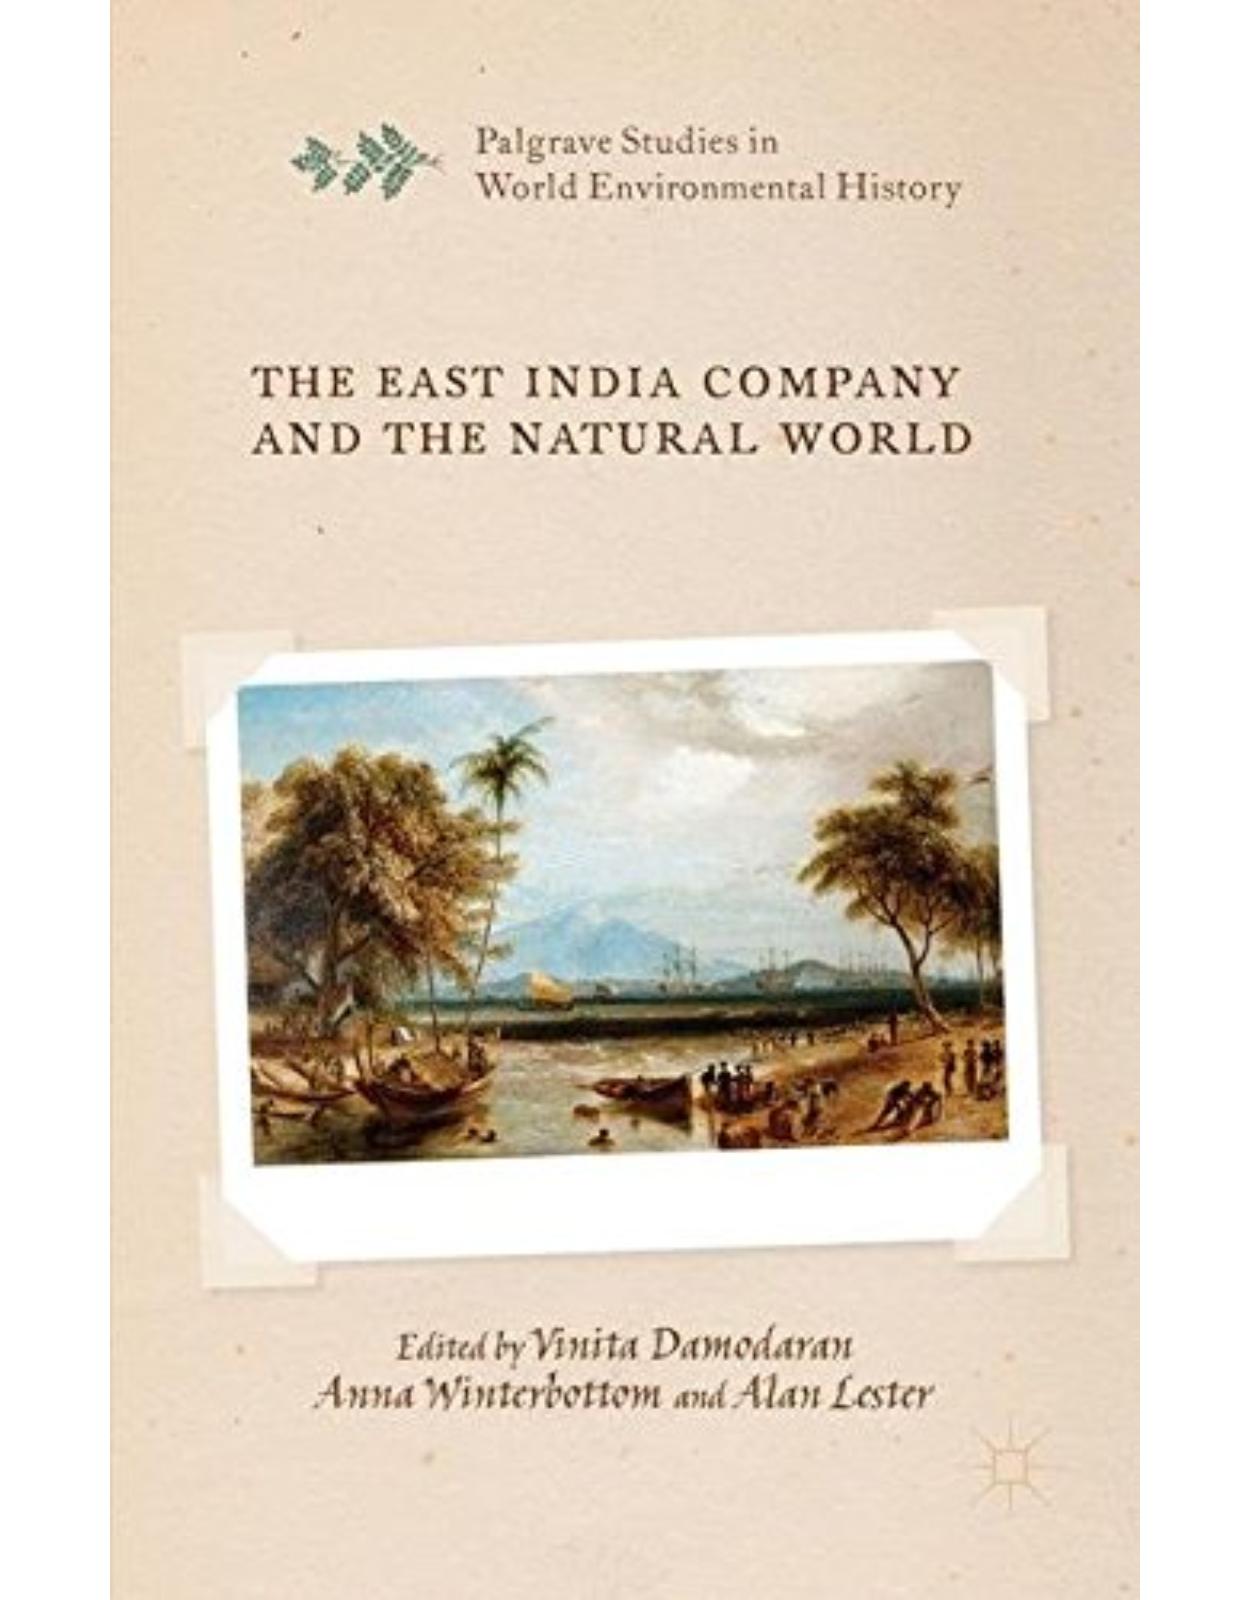 The East India Company and the Natural World